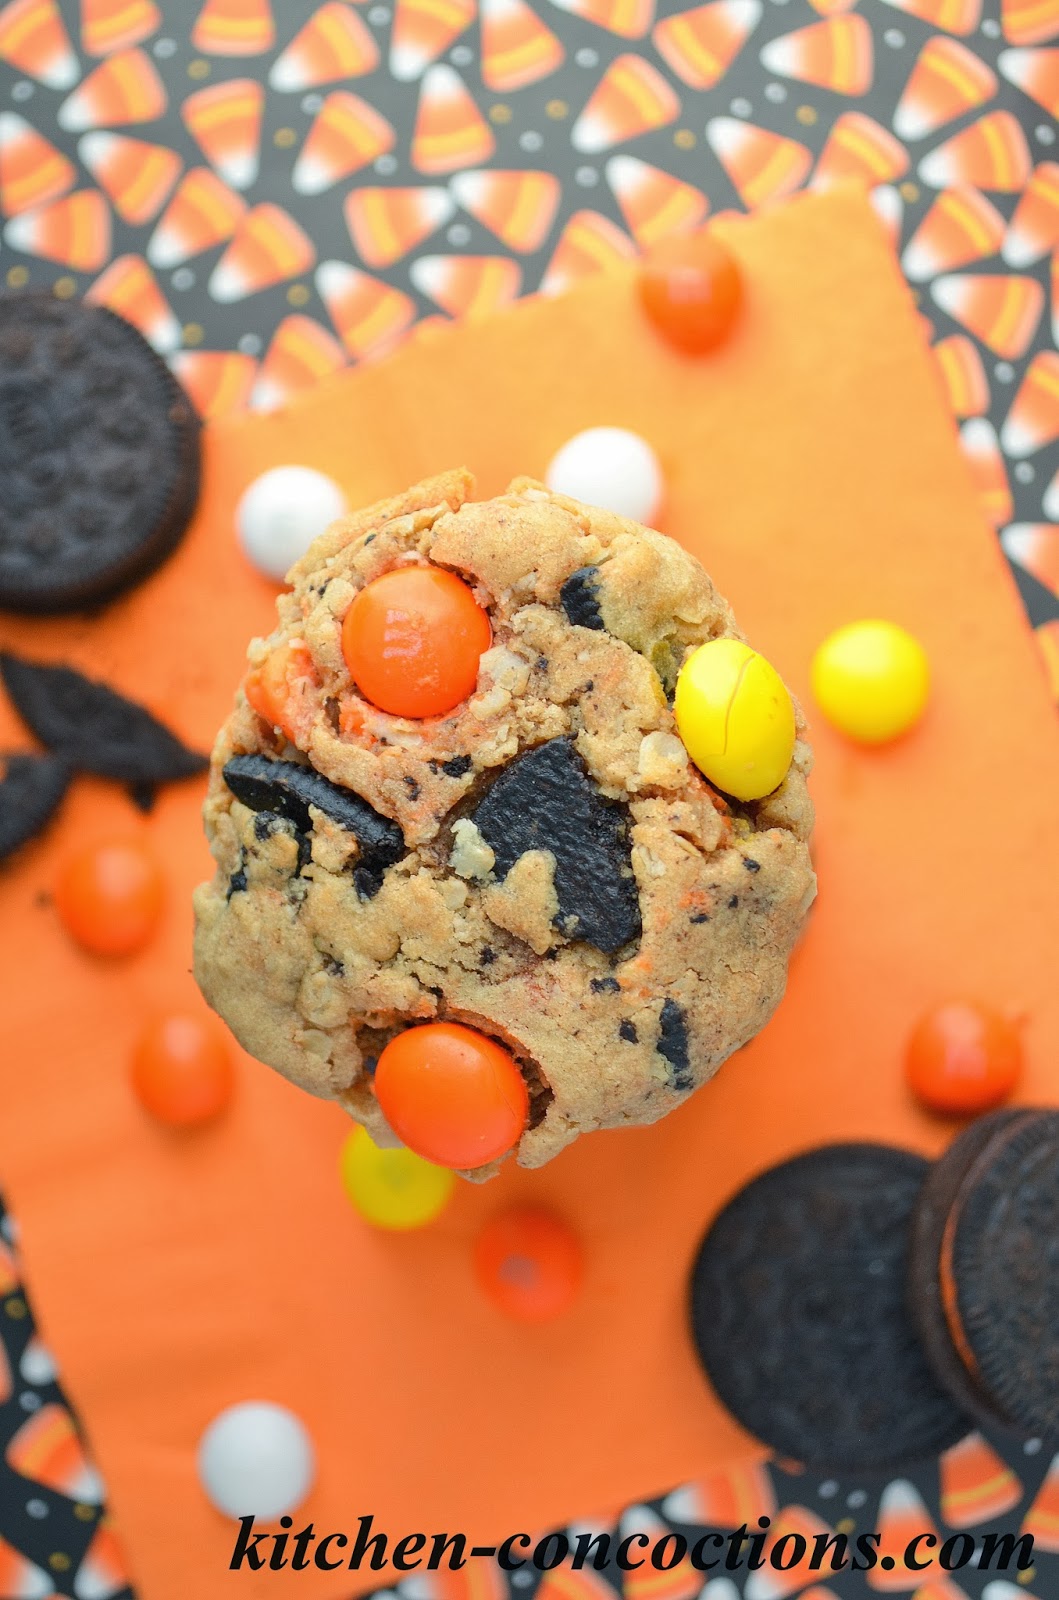 "Ghoulish Grub" - Monster Munch Cookies - Kitchen Concoctions